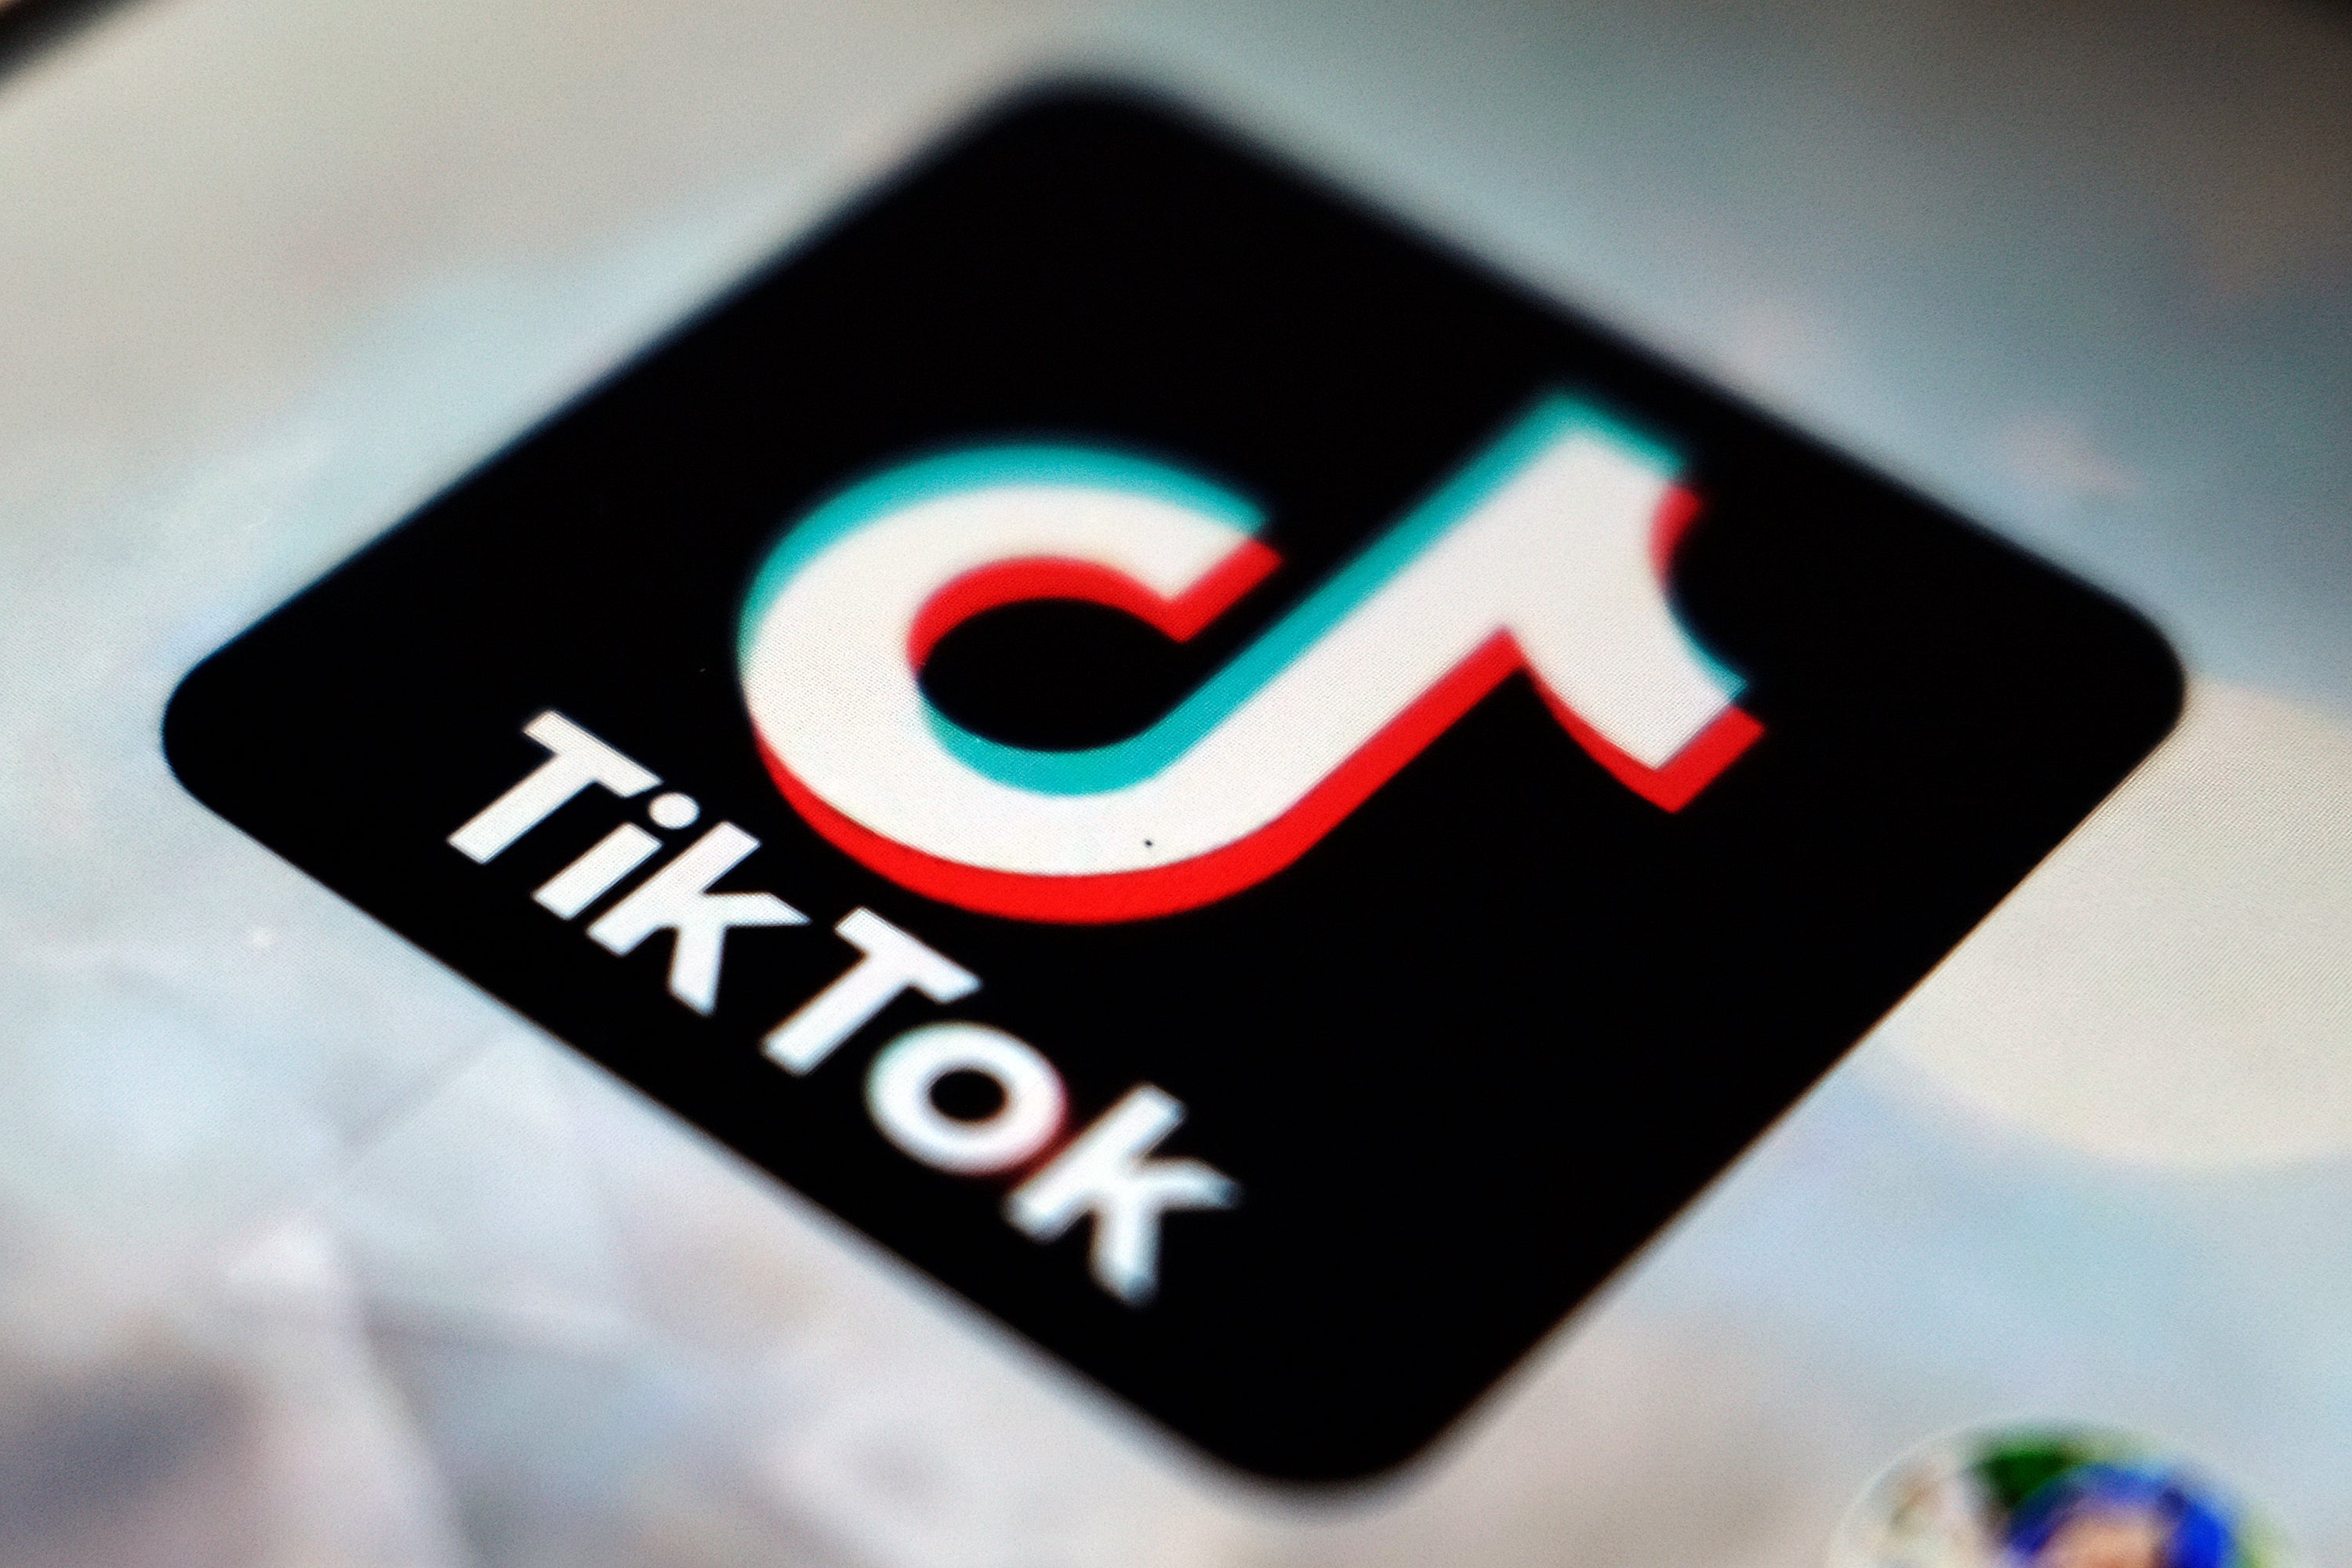 Iowa’s attorney general is suing TikTok for allegedly misleading parents about inappropriate content